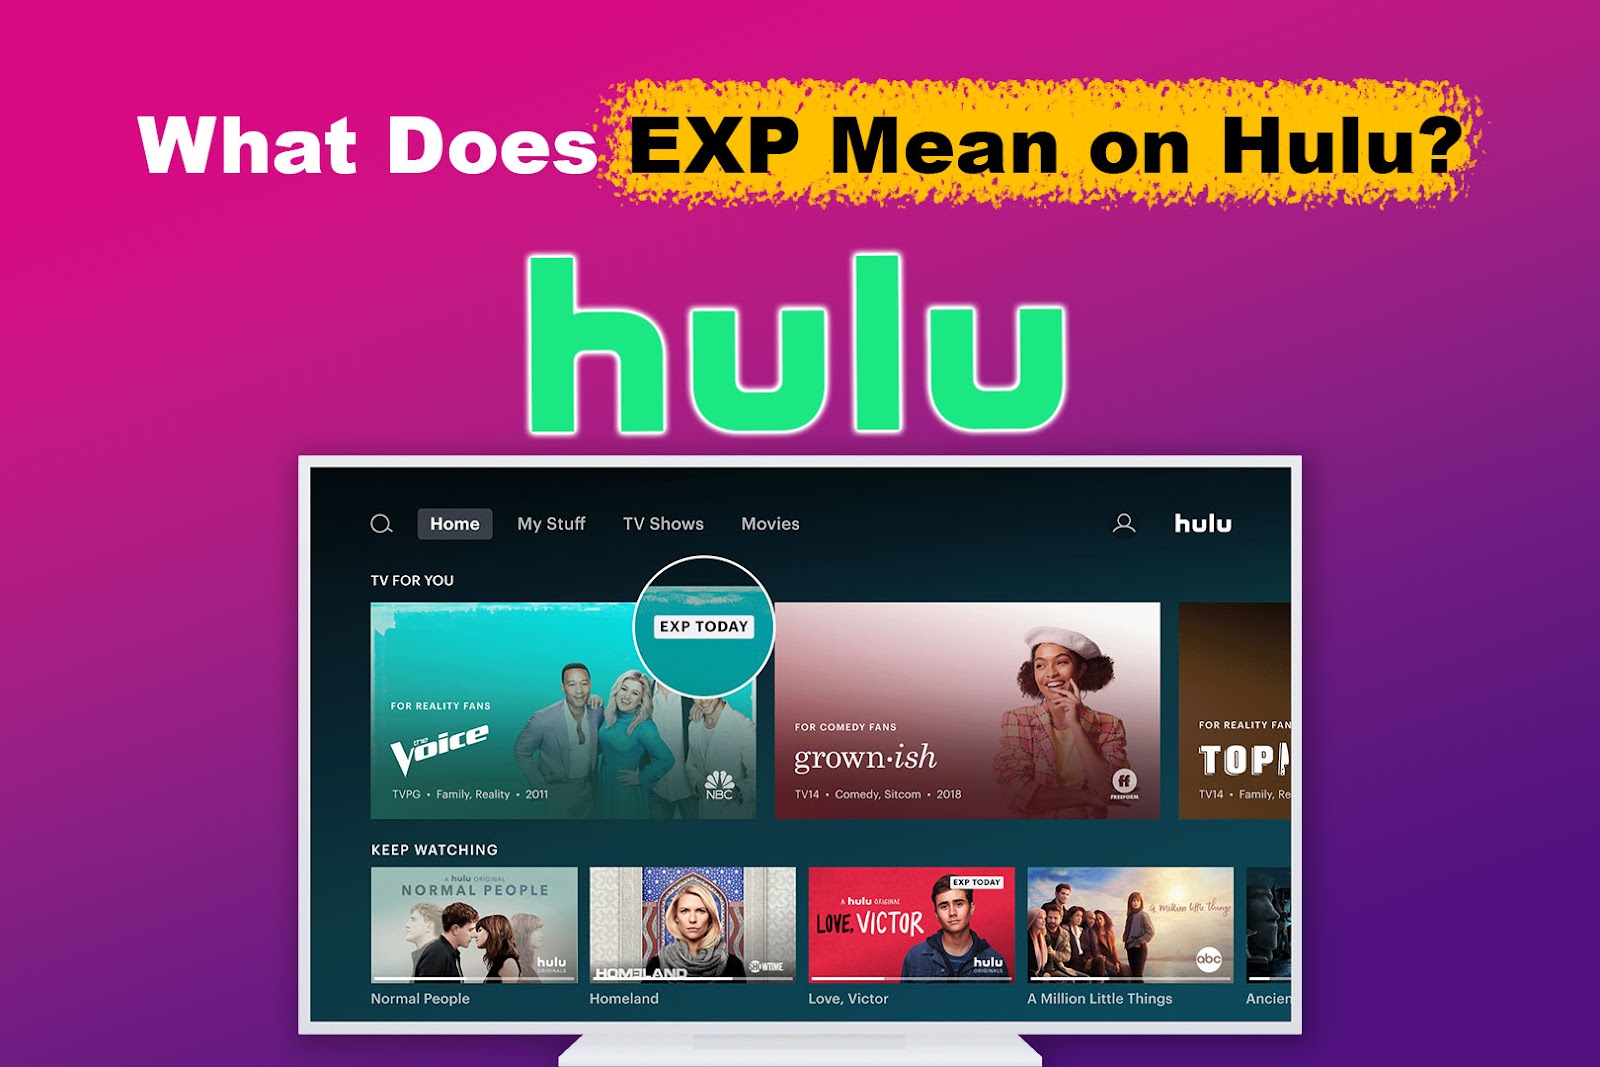 What Does EXP Mean on Hulu